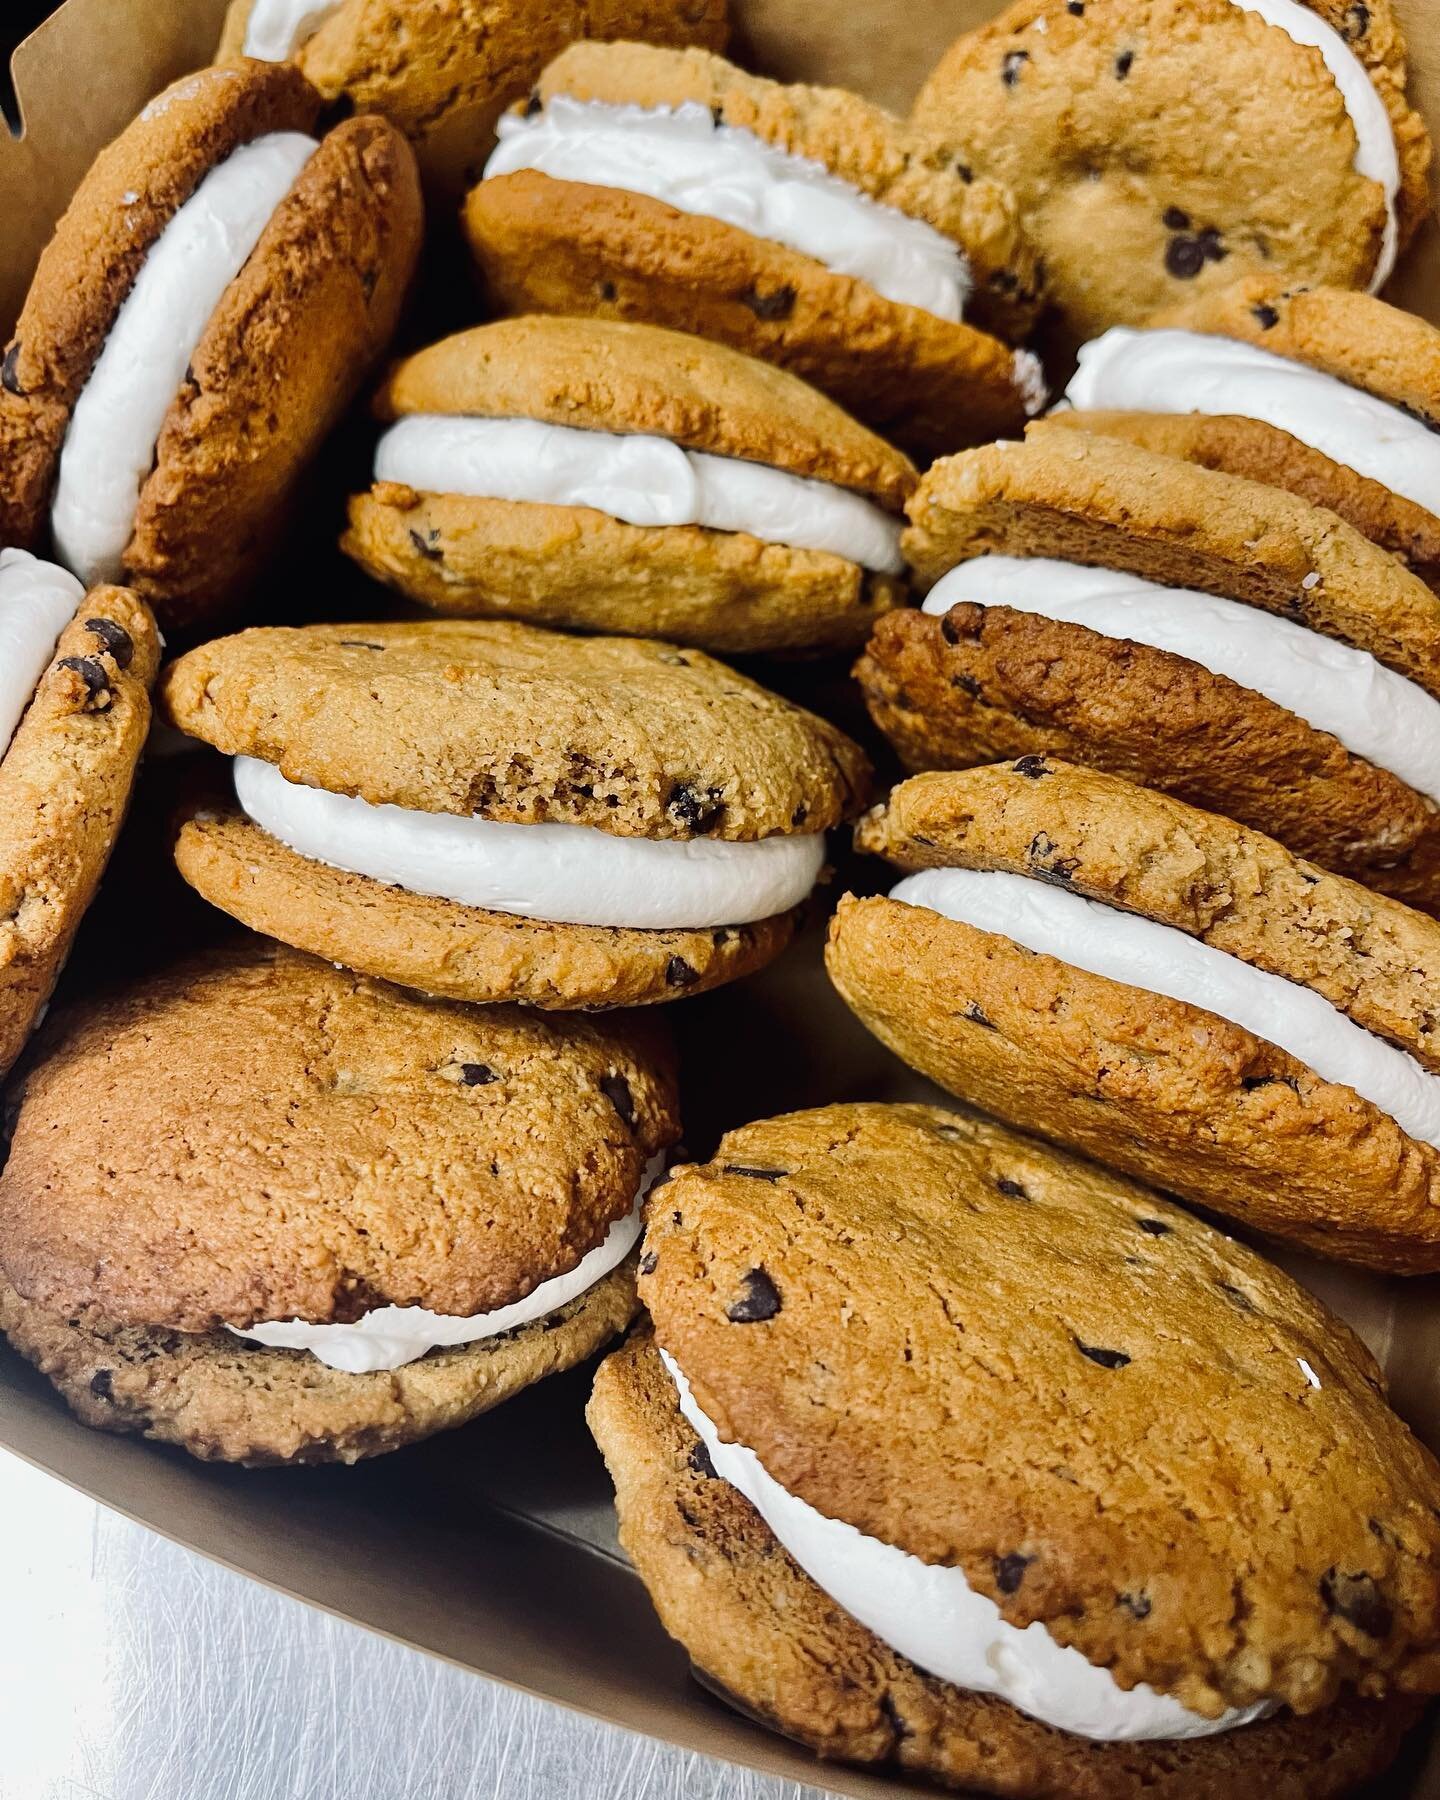 Whoopies are Ready! Swing by and grab some from locations ! 

Always Organic, Grain &amp; Gluten Free. 

Organic Grain &amp; Gluten Free Bakery 
Immune System Support Caf&eacute; 
✊🏽Celiac Friendly 🤟🏽
🍏Low Carb, Vegan, &amp; Keto
🍎AIP, Whole30, 